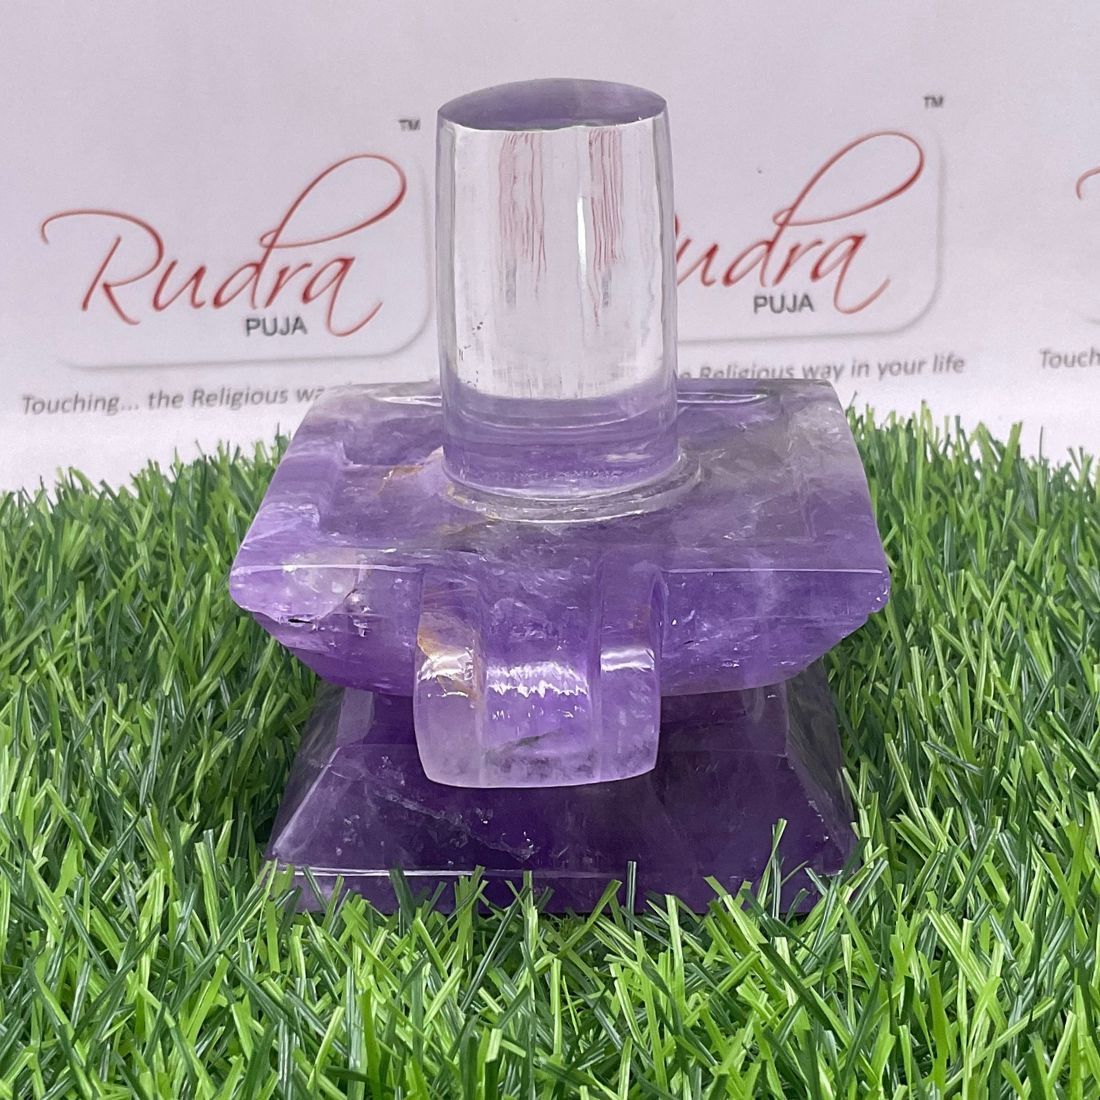 Sphatik Lingam With Amethyst Square Base - 4.25 Inches (879 Grams)